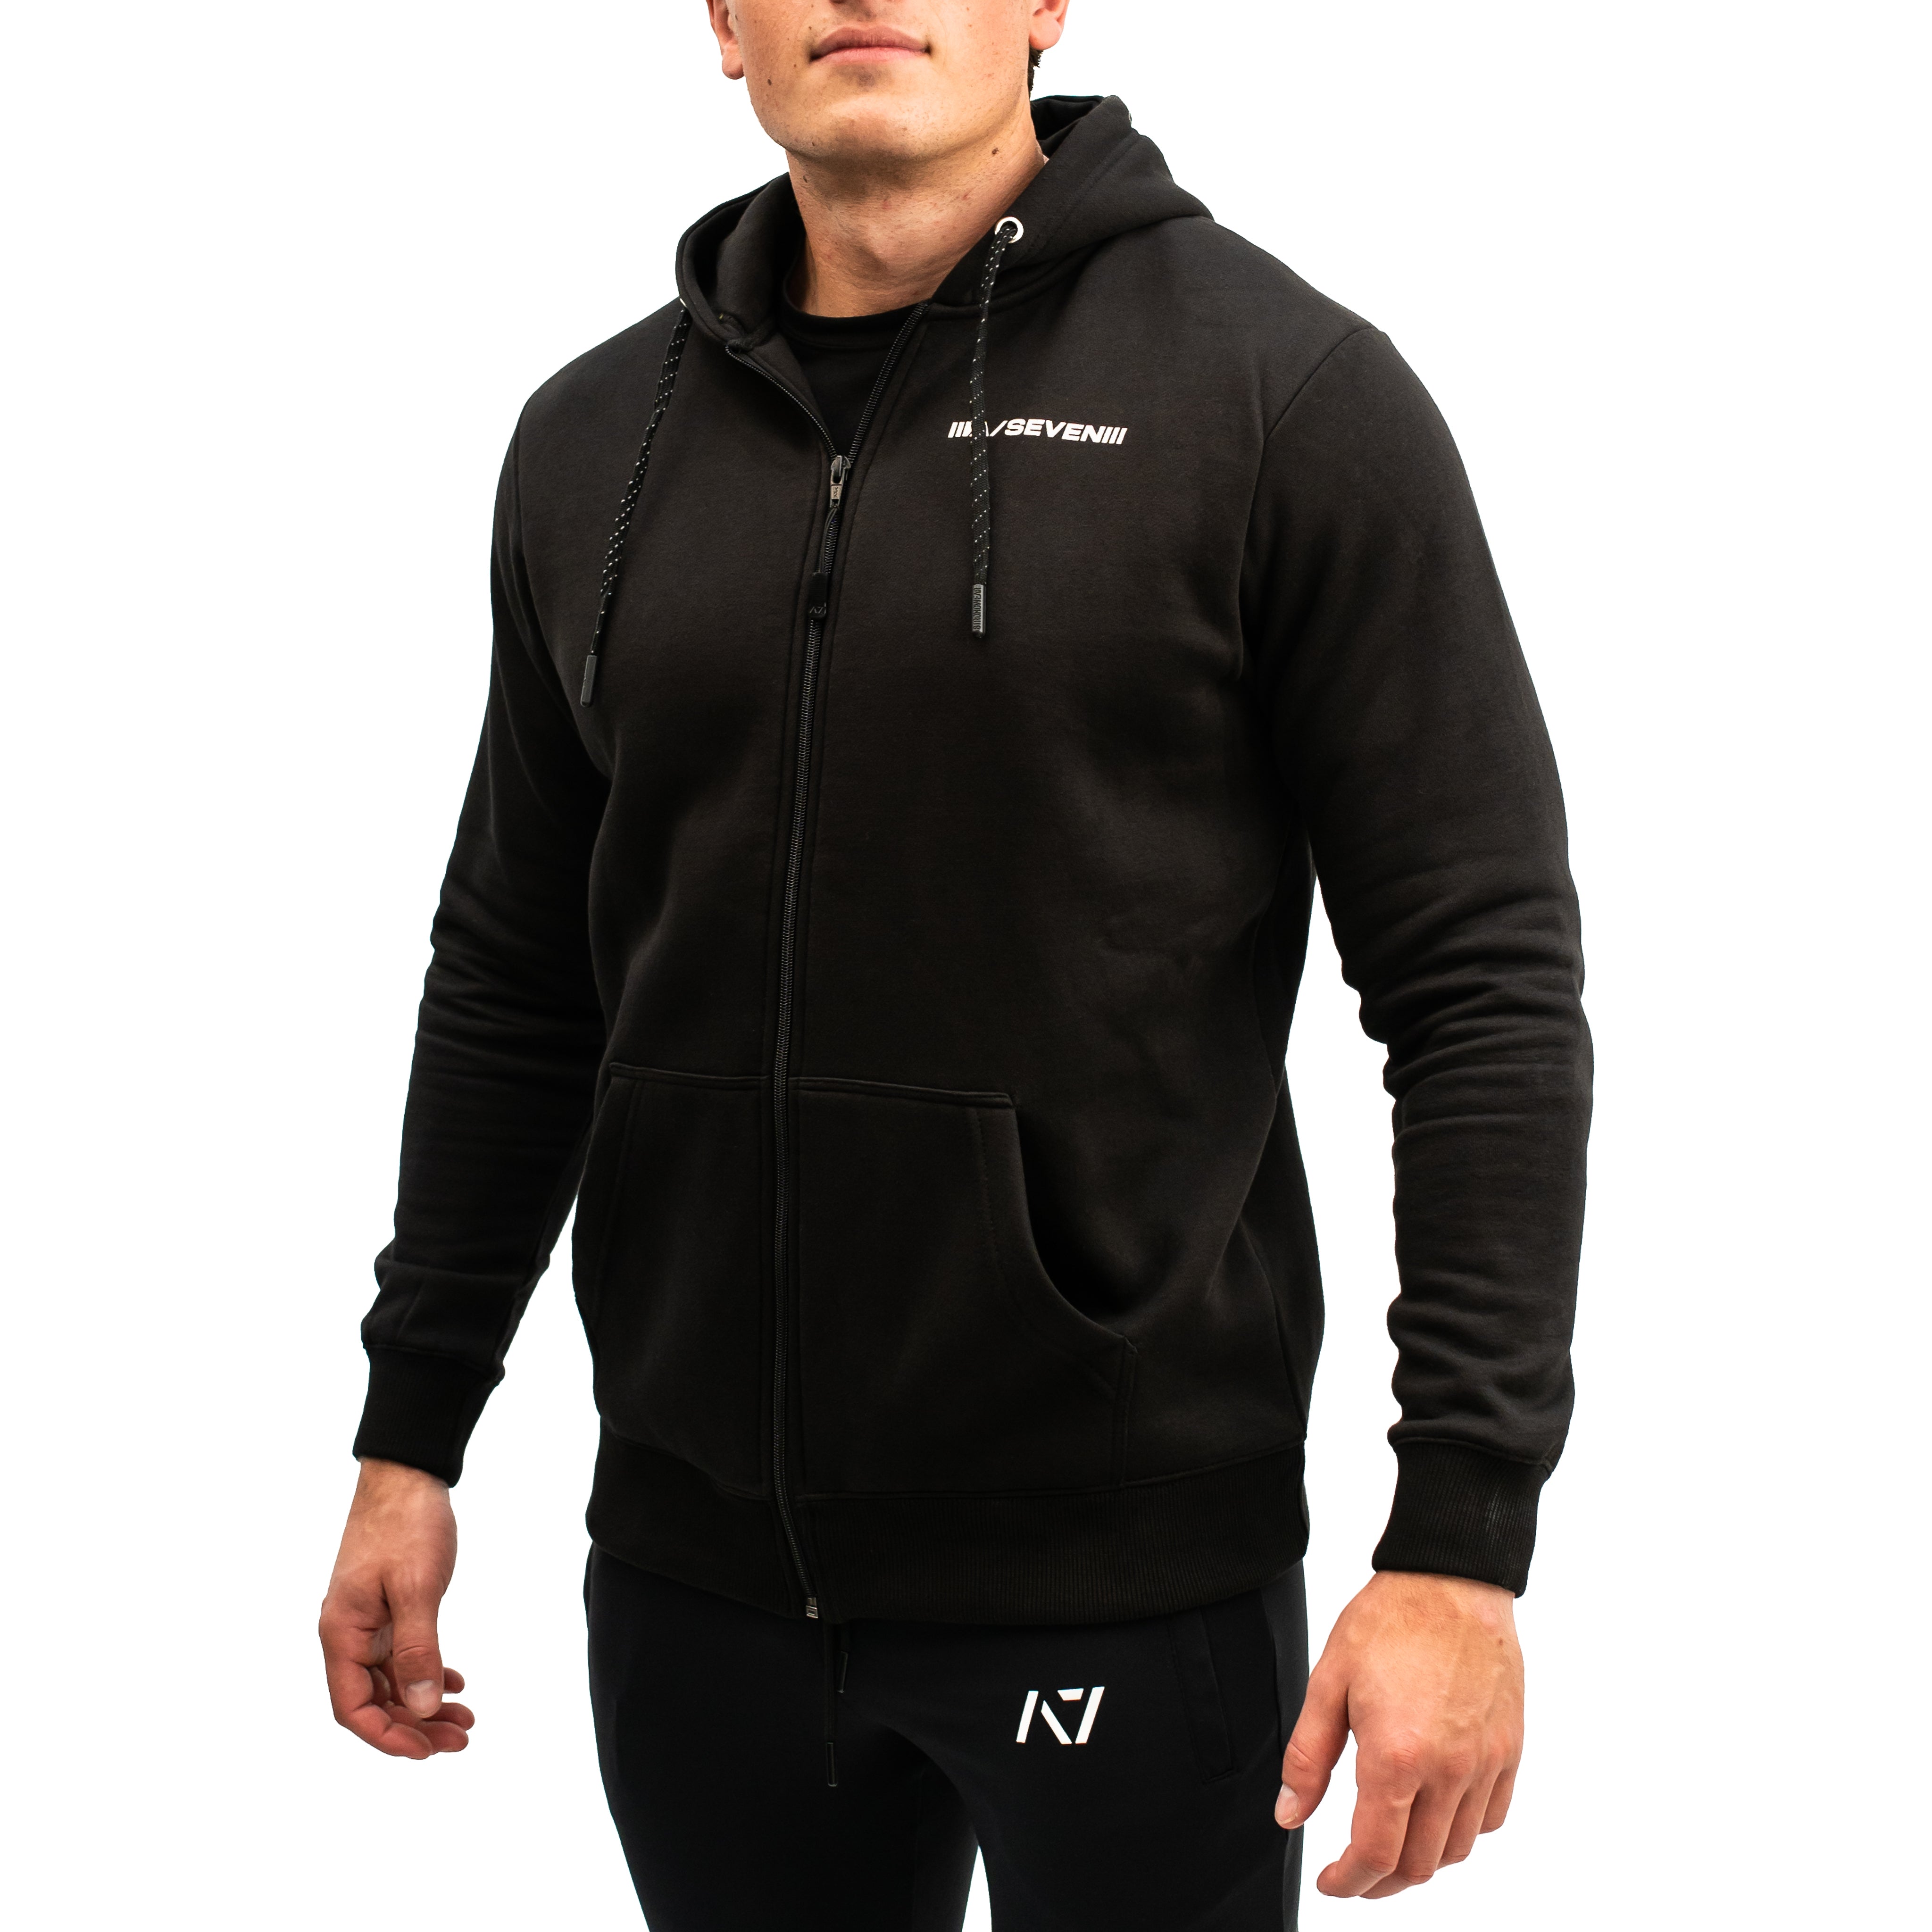 LTB Tide is a zip up hoodie great for casual wear or lifting in the gym. Purchase LTB Tide zip up hoodie in UK and Europe from A7 UK. A7 have the best Bar Grip Tshirts, shipping to UK and Europe from A7 UK. LTB TIde is our newest design on our zip up hoodie. A black hoodie with a colourful wave design on the back. A7UK supplies the best Powerlifting apparel for all your workouts. Available in UK and Europe including France, Italy, Germany, the Netherlands, Sweden and Poland.